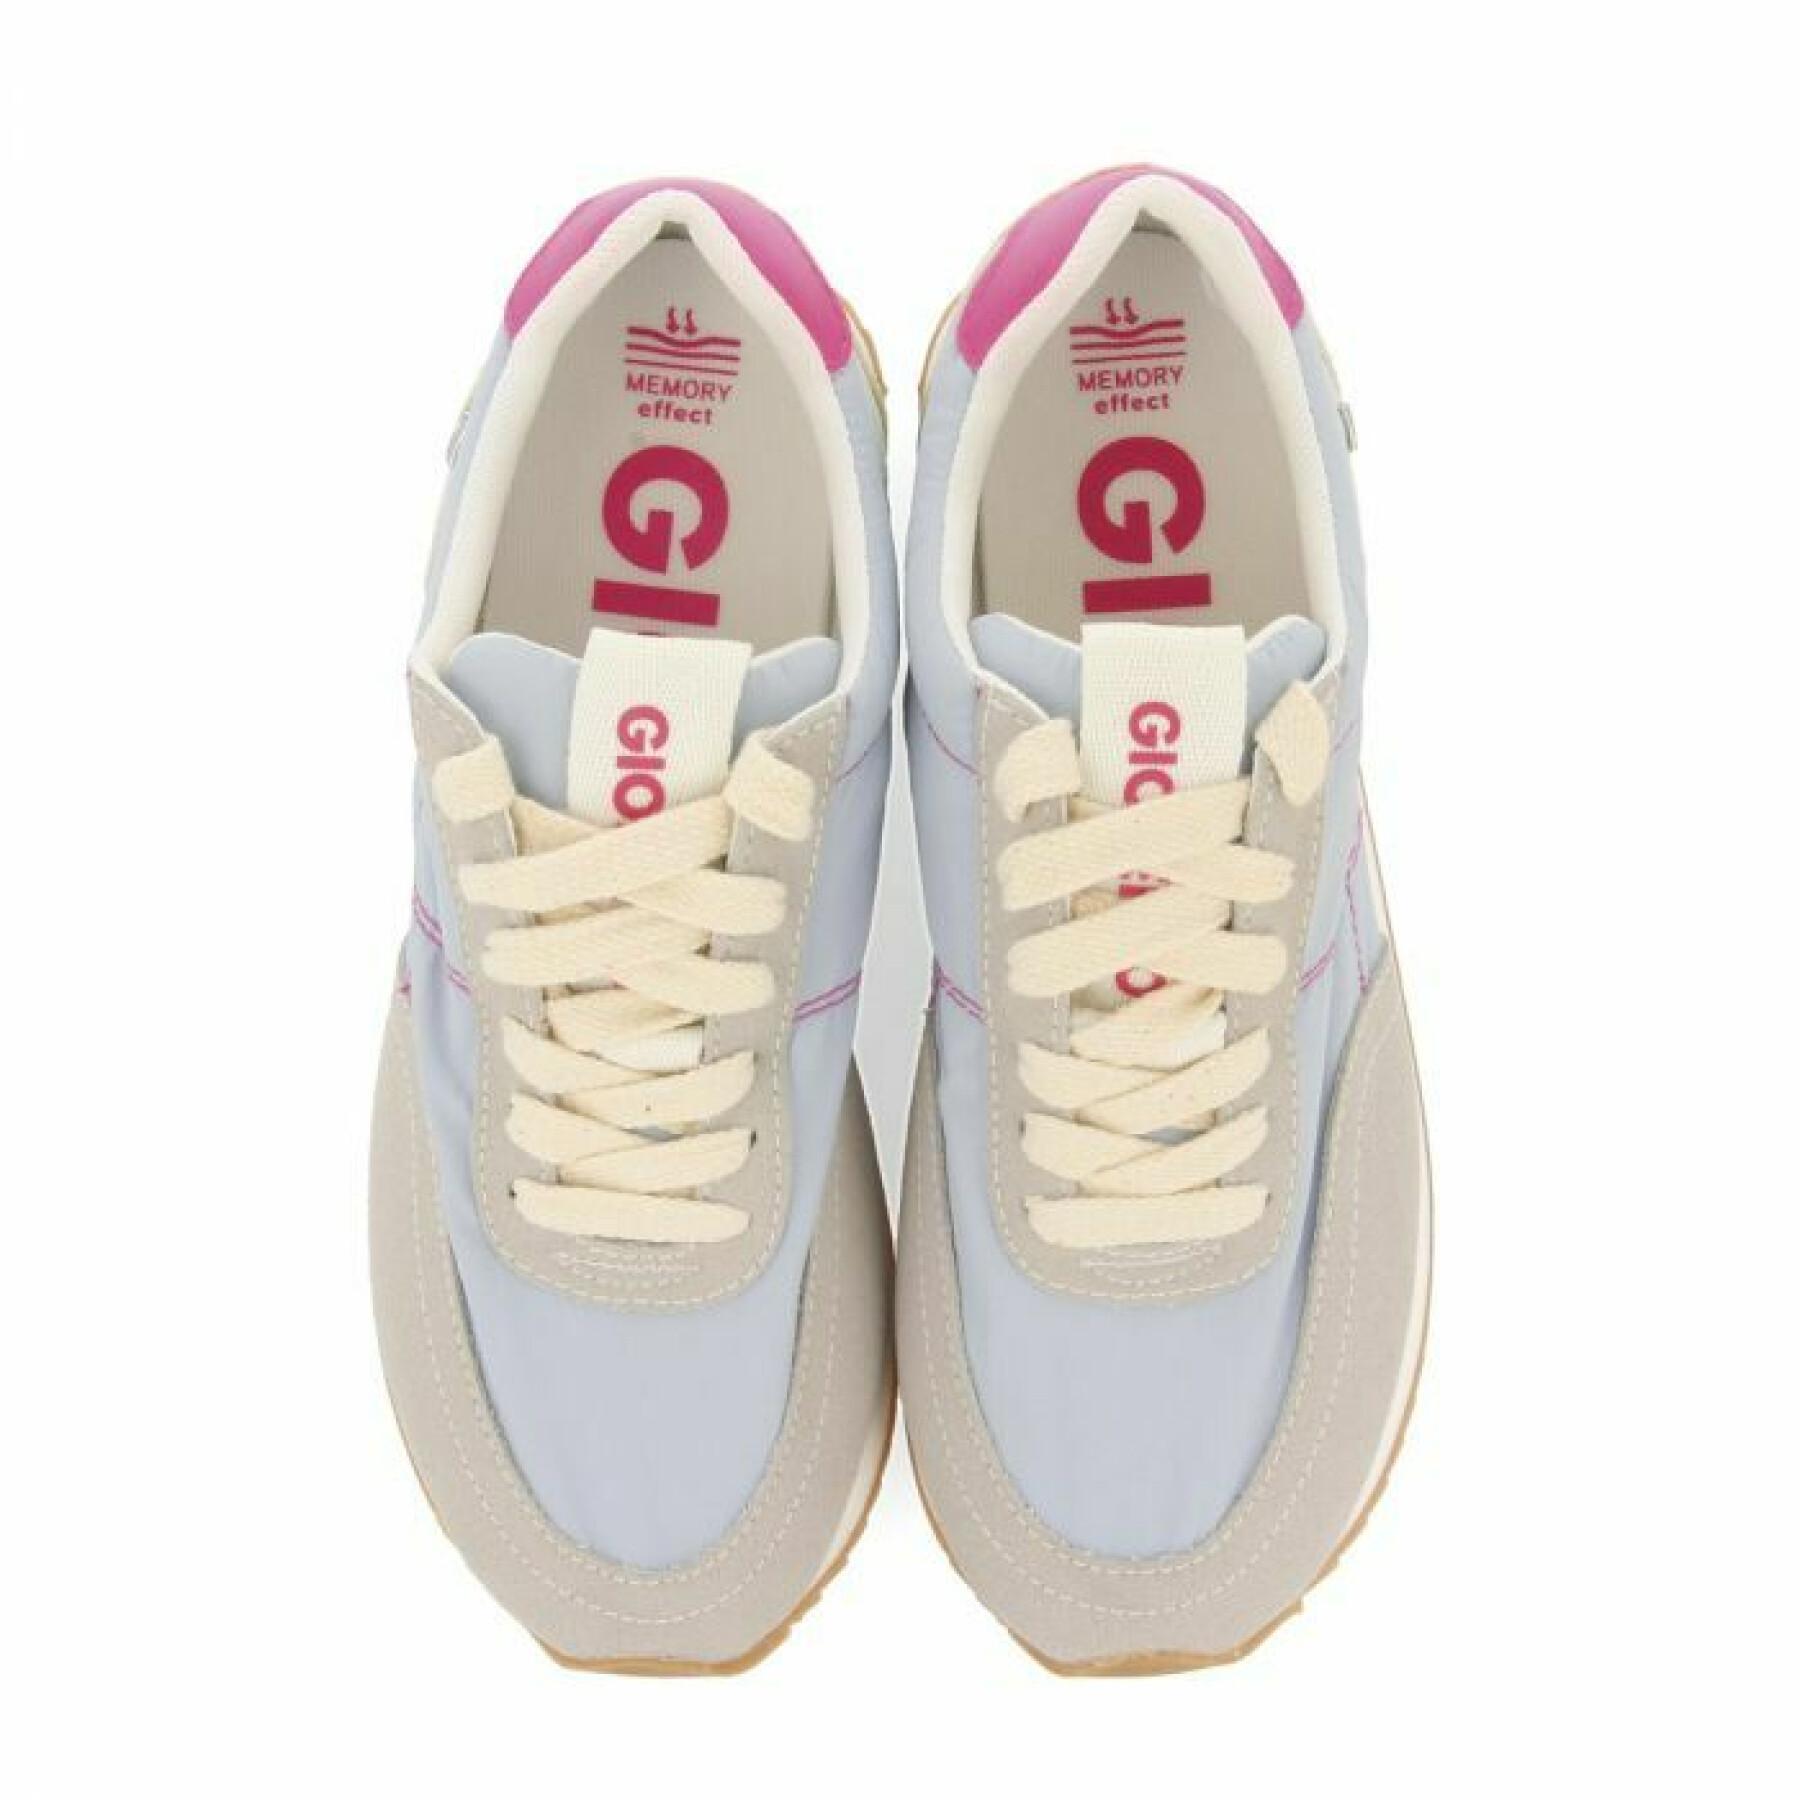 Women's sneakers Gioseppo Liscate